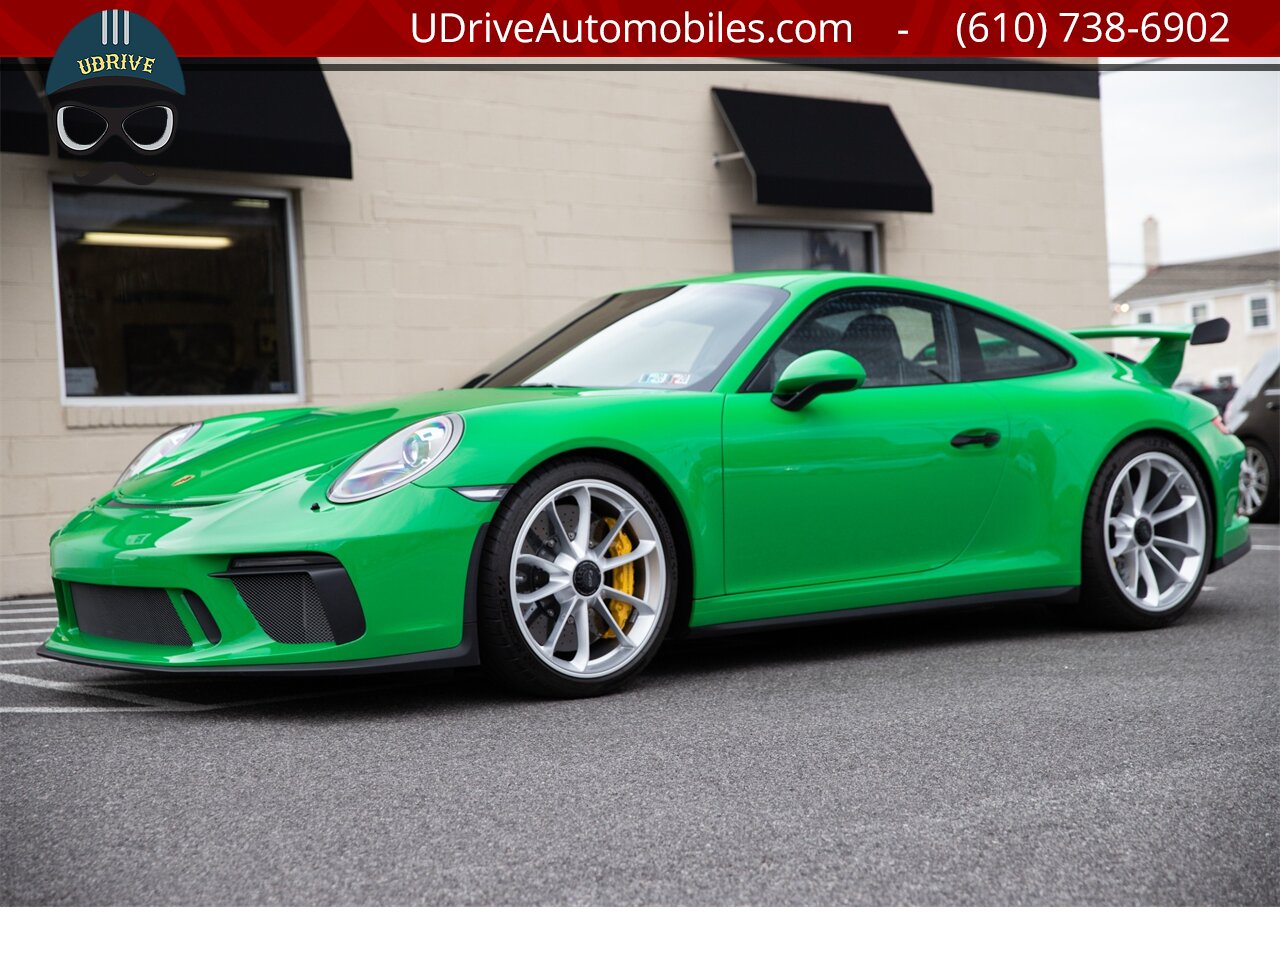 2018 Porsche 911 GT3 6 Speed Paint To Sample Viper Green 48 Miles  Front Axle Lift PCCB Carbon Bucket Seats - Photo 9 - West Chester, PA 19382